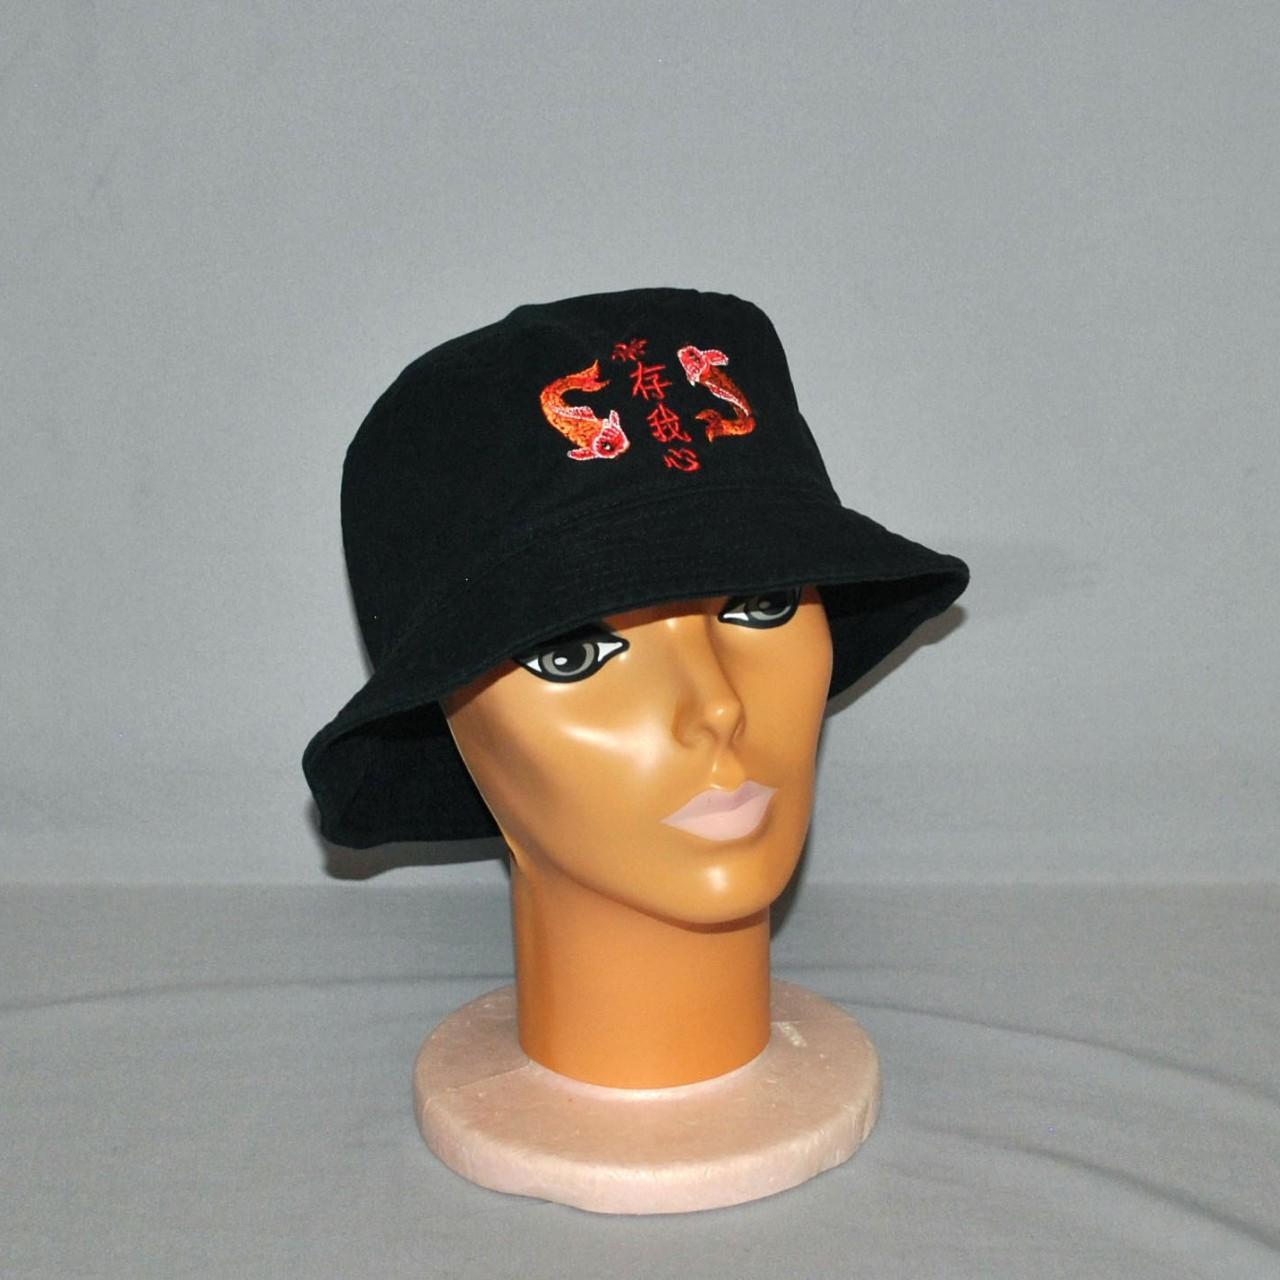 Empyre Koi fish bucket hat one size fits most. Black - Depop